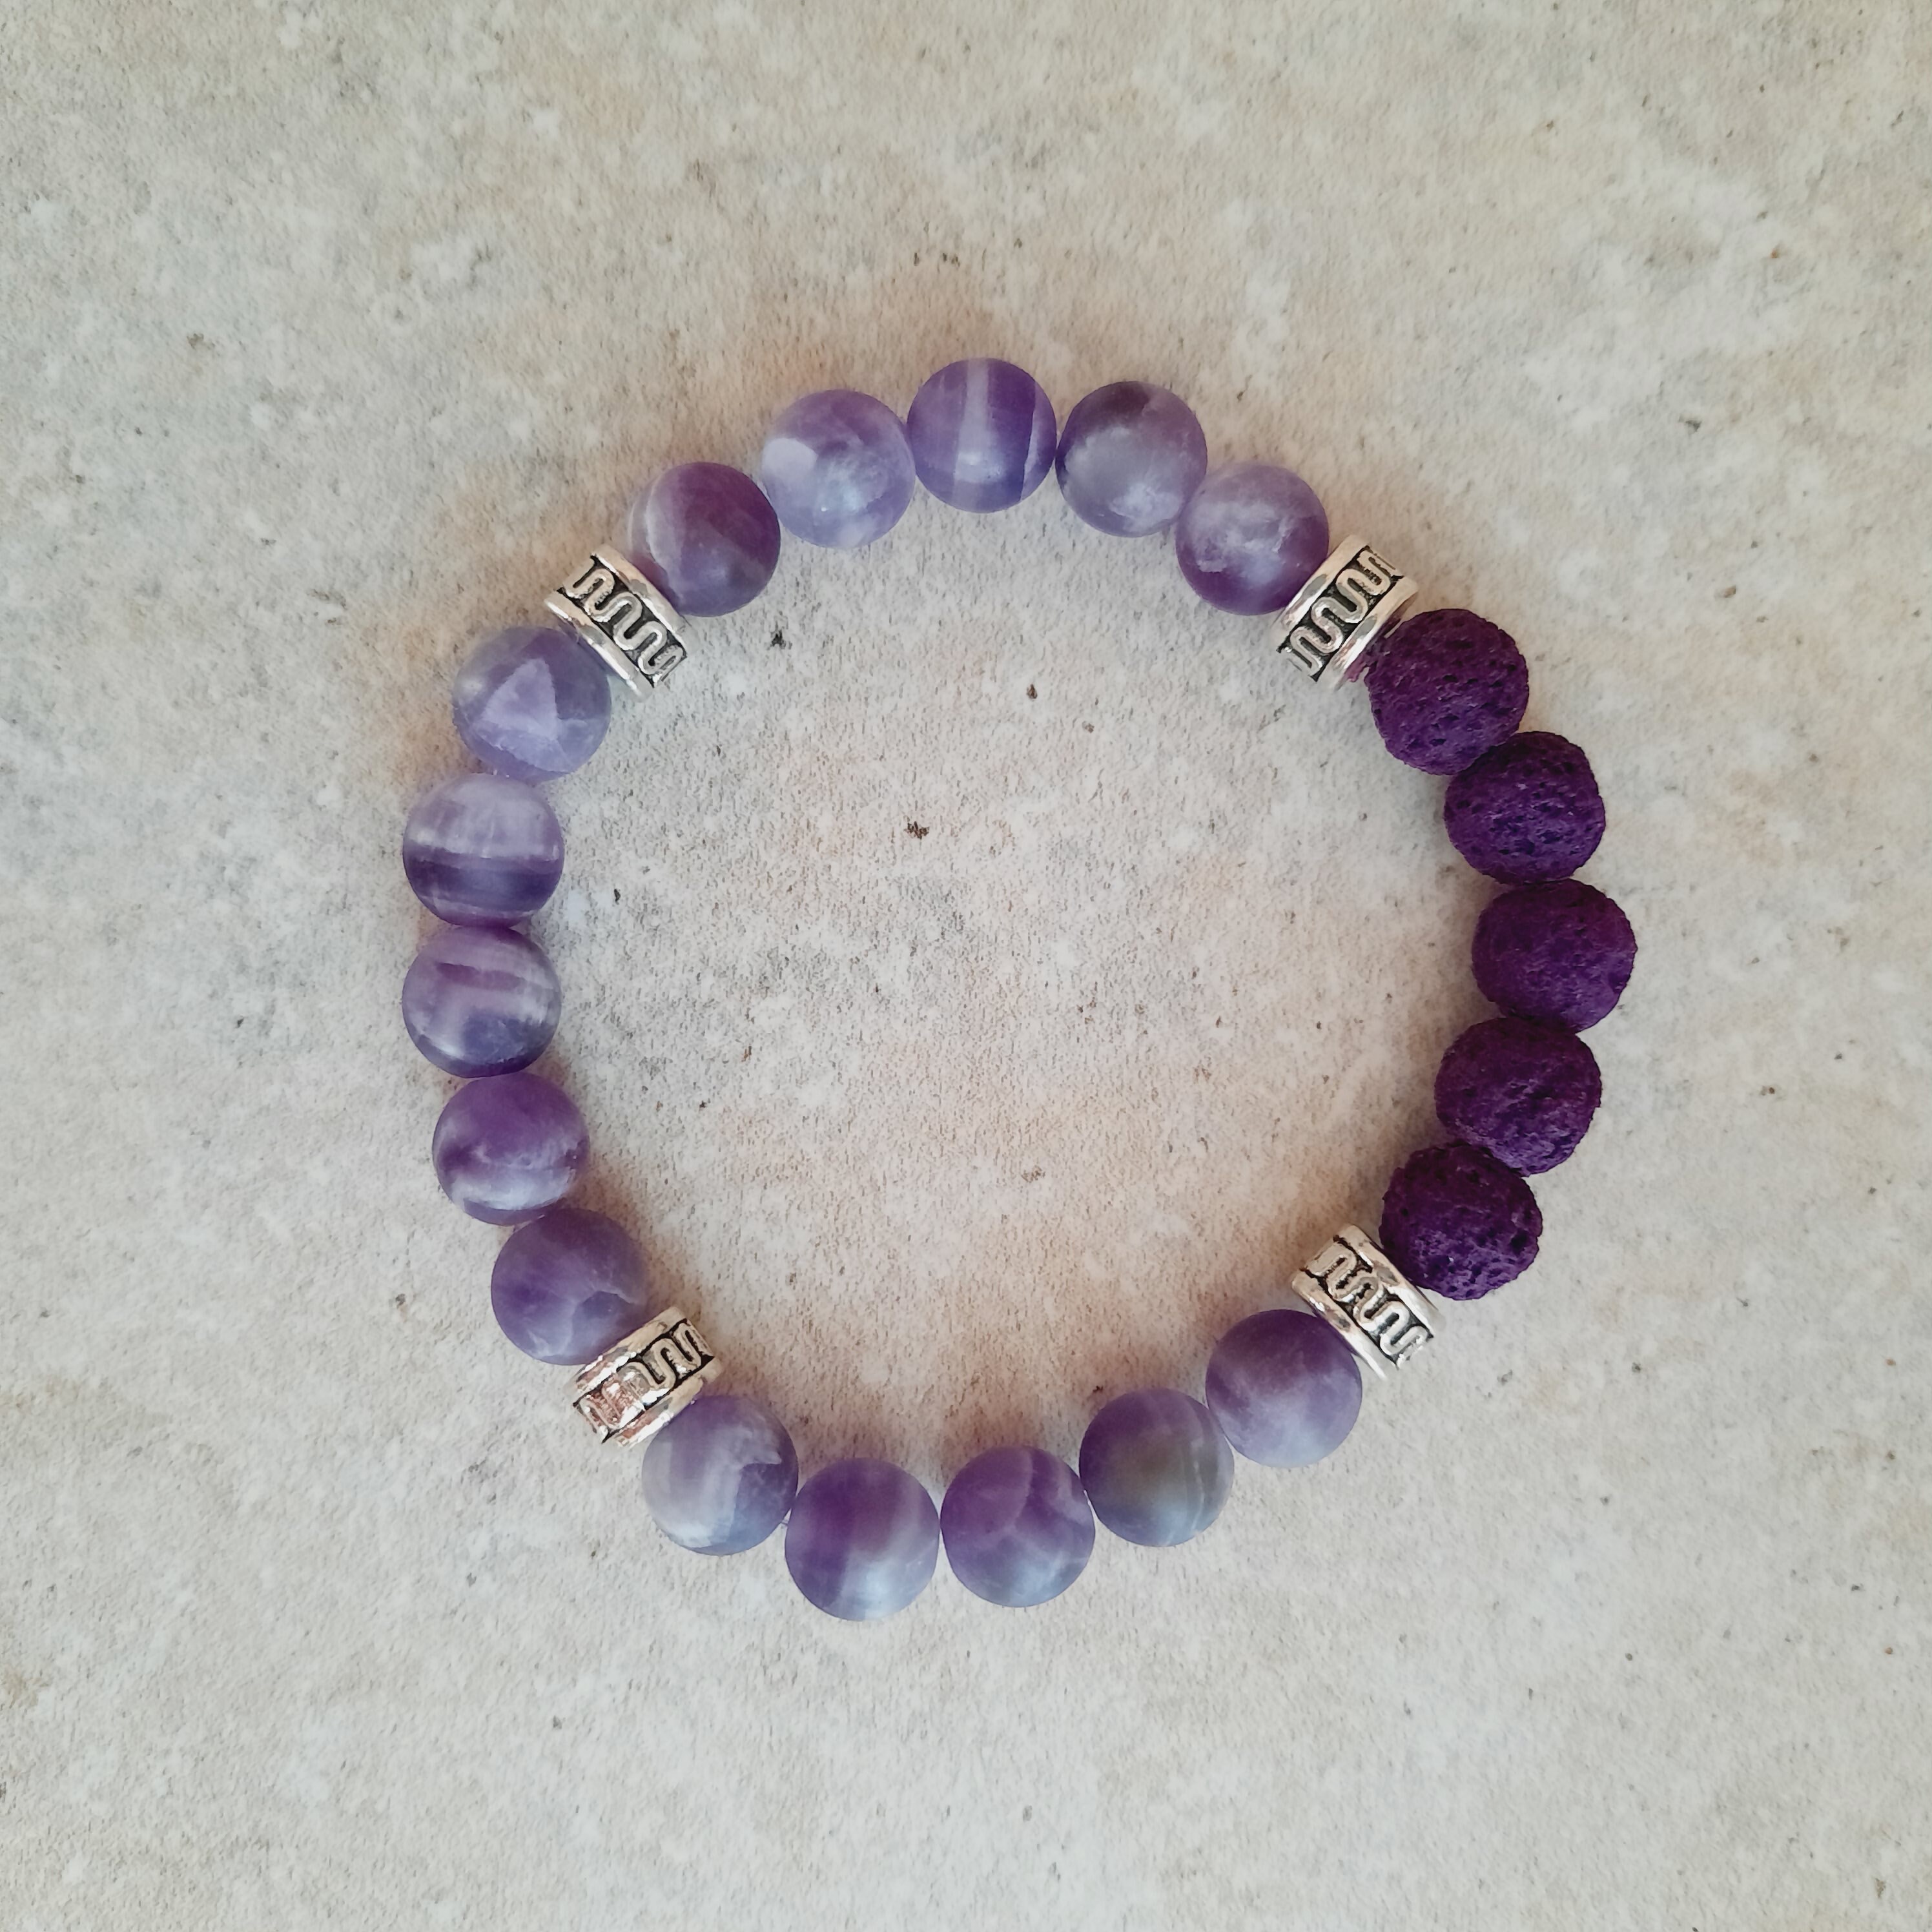 Amethyst Diffuser Bracelet for Anxiety Sobriety Stress - Etsy